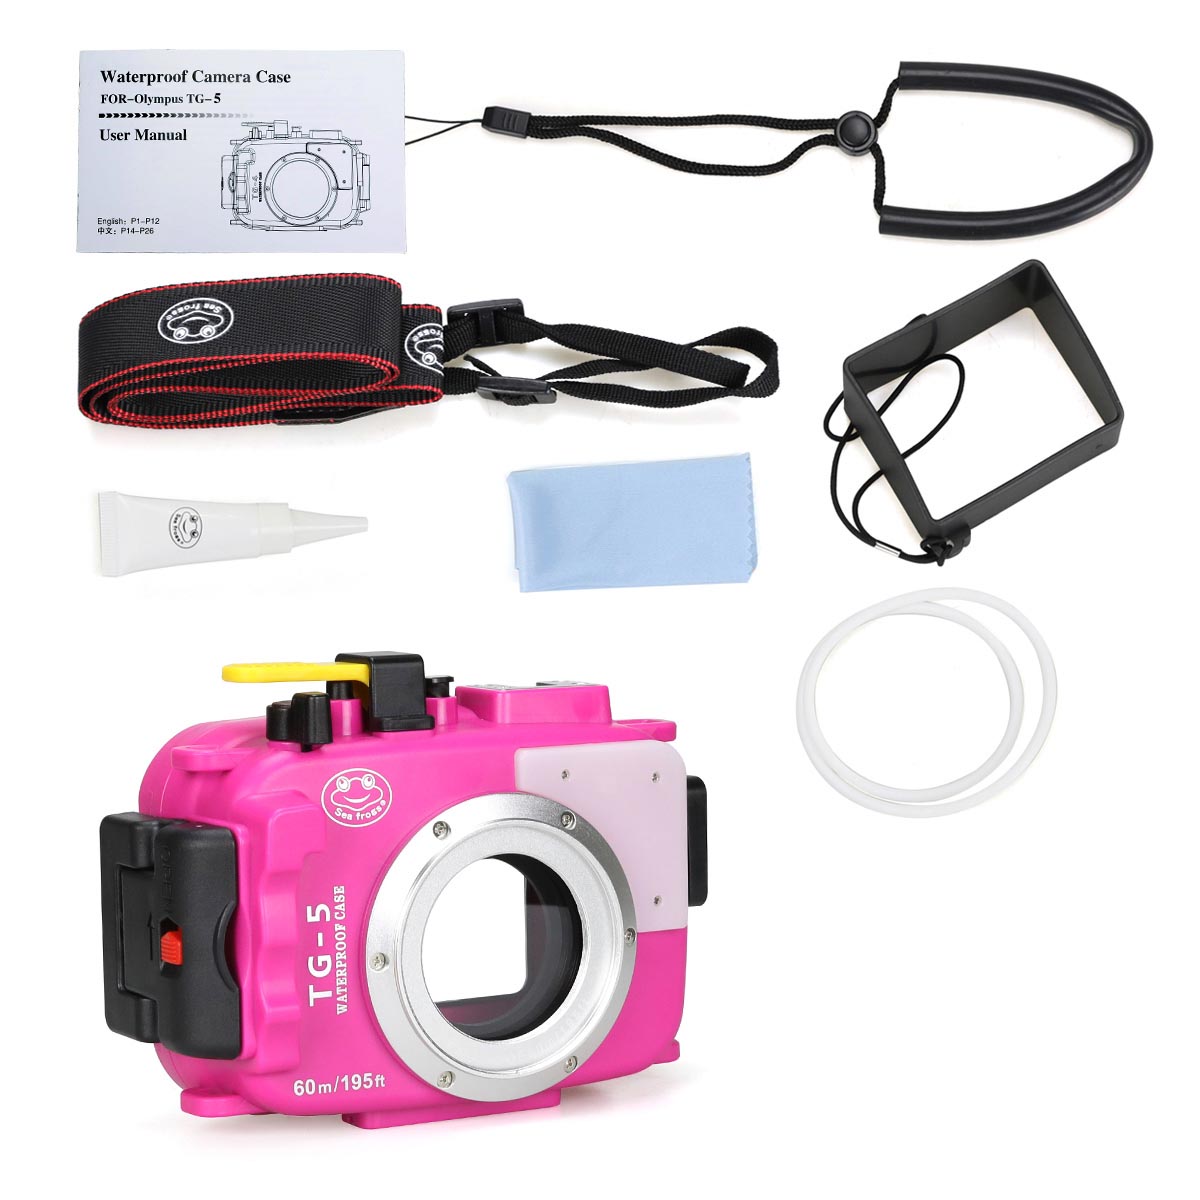 Seafrogs 60m/195ft Underwater Camera Housing for Olympus TG-5(Pink)